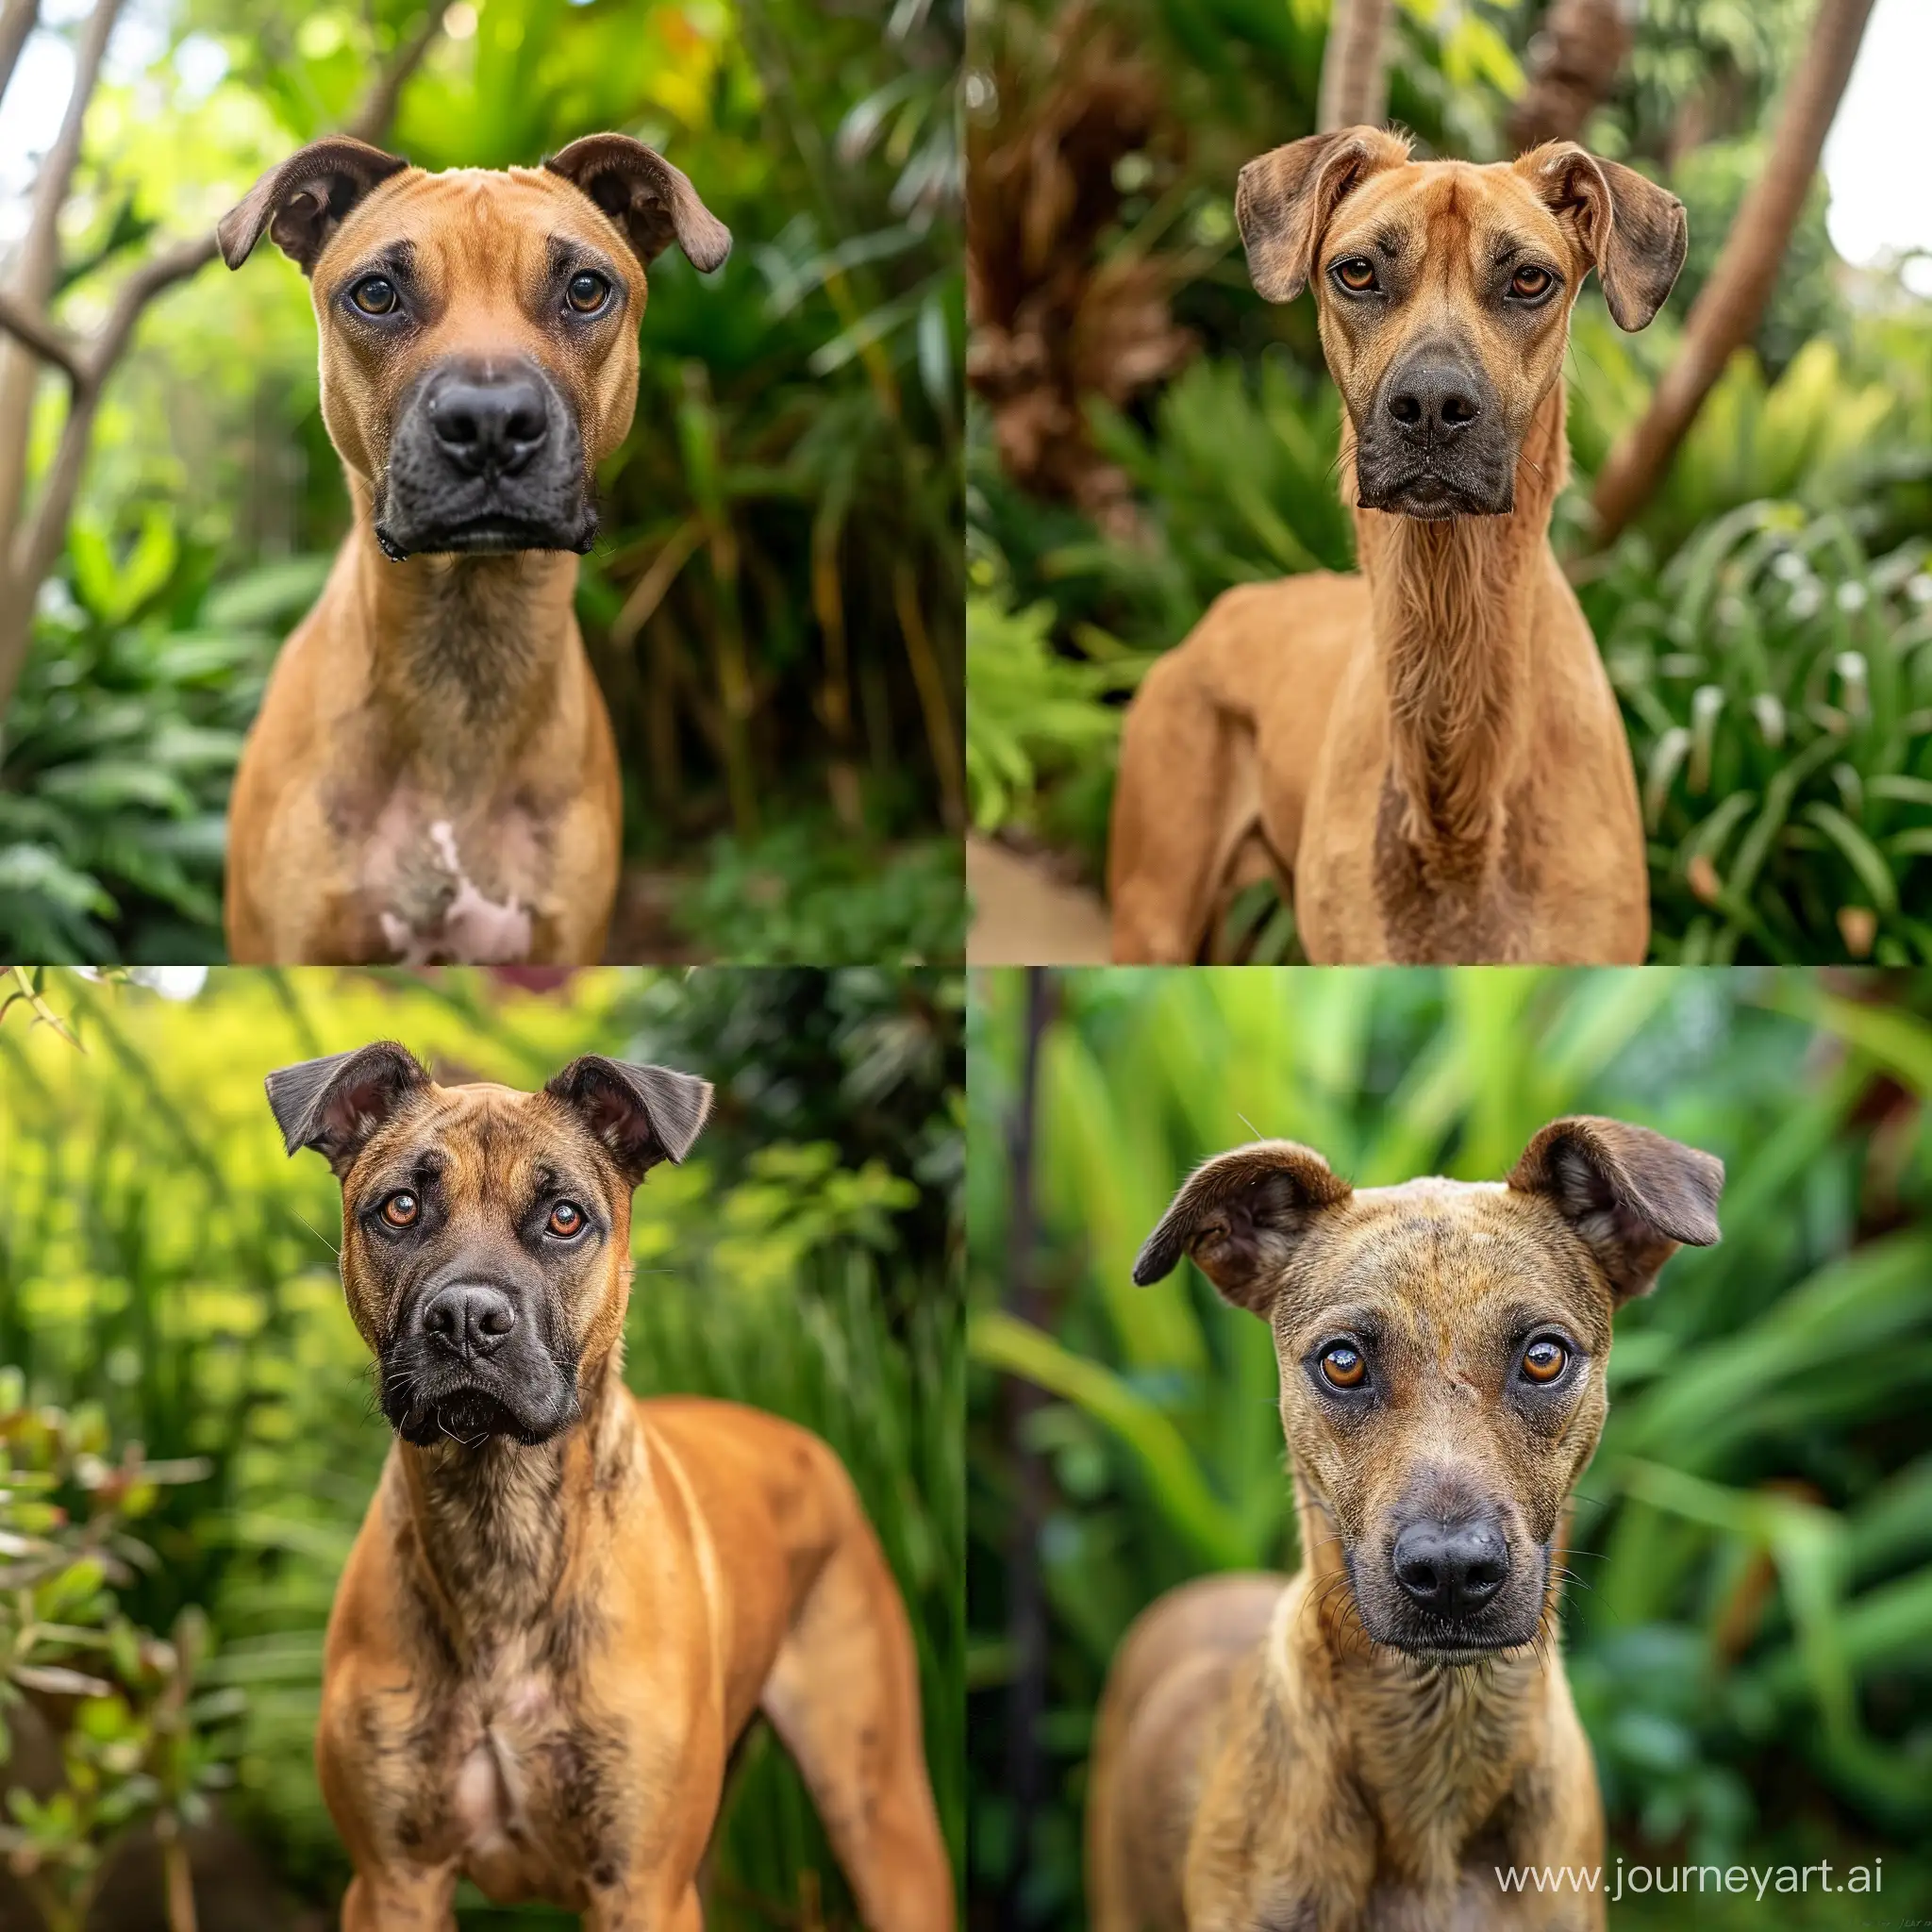 dog like camel with humps, humps, mixed with donkey, mix between a German Boxer and a Bulldog, coat color of an Irish Terrier, standing, looking directly into the camera, backdrop of a green garden